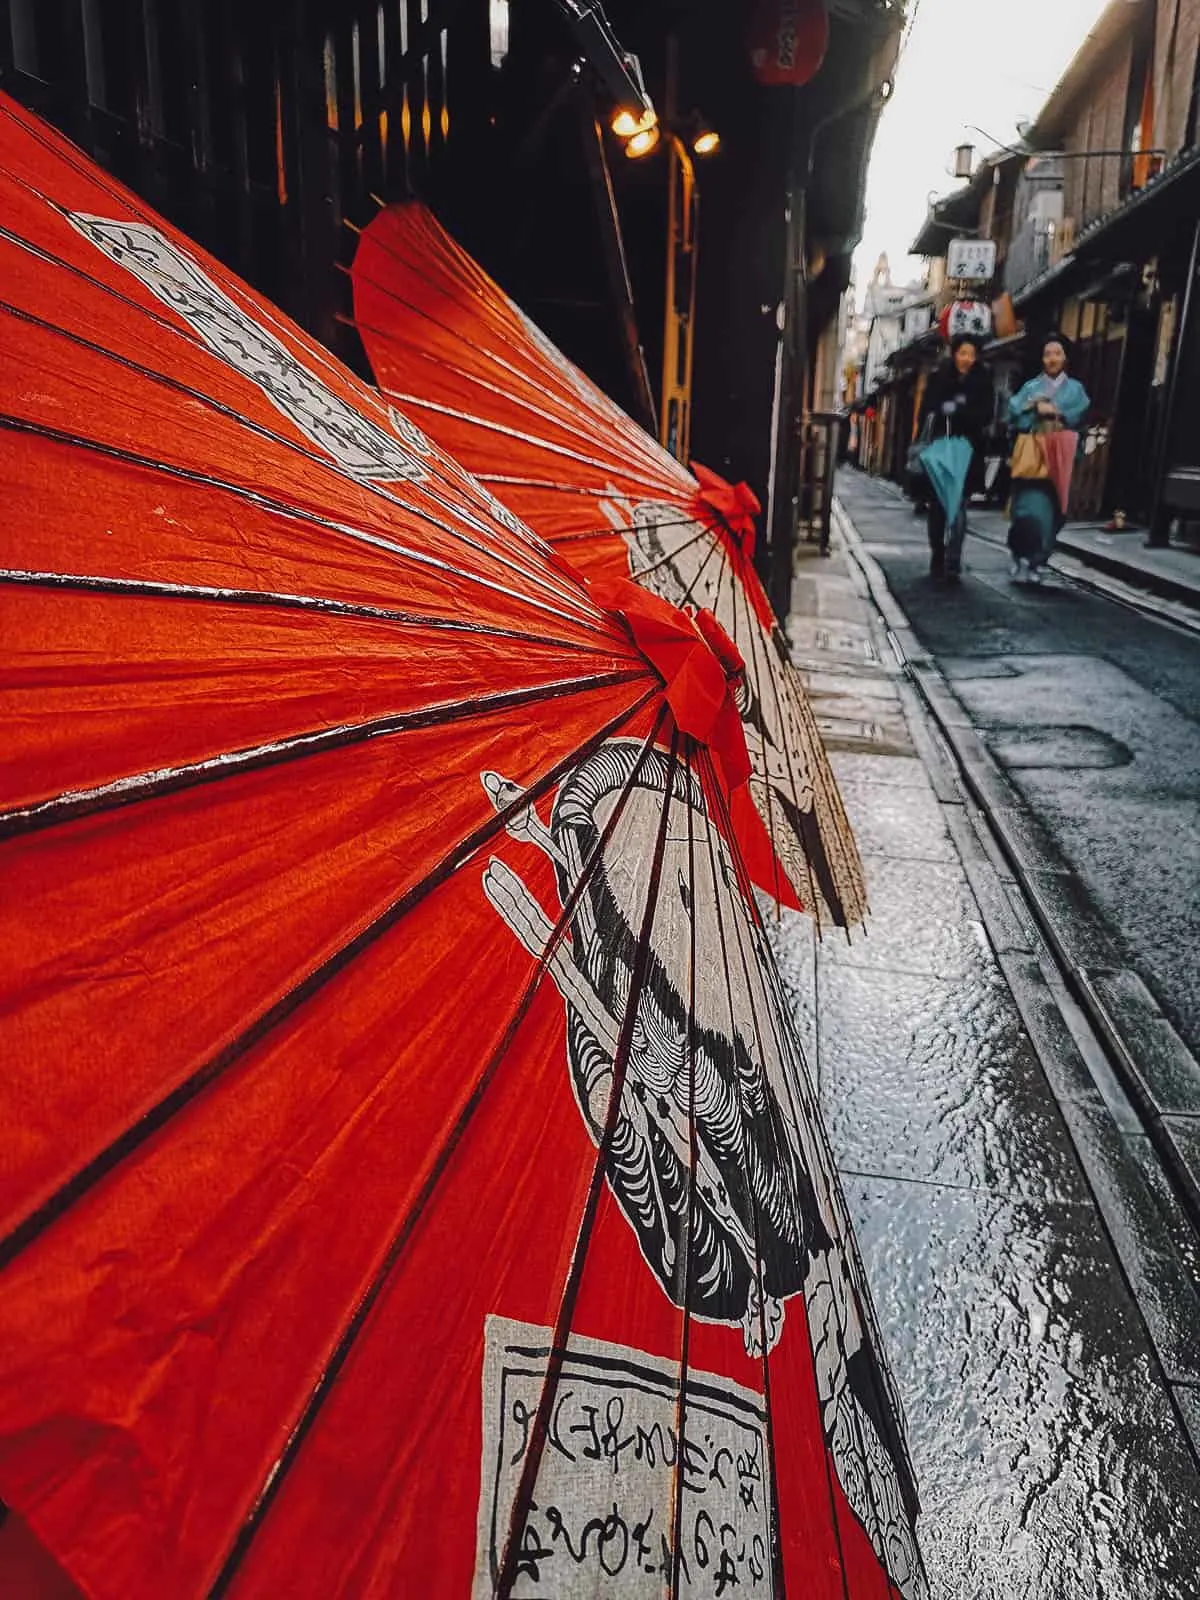 Red paper parasols in Pontocho Alley